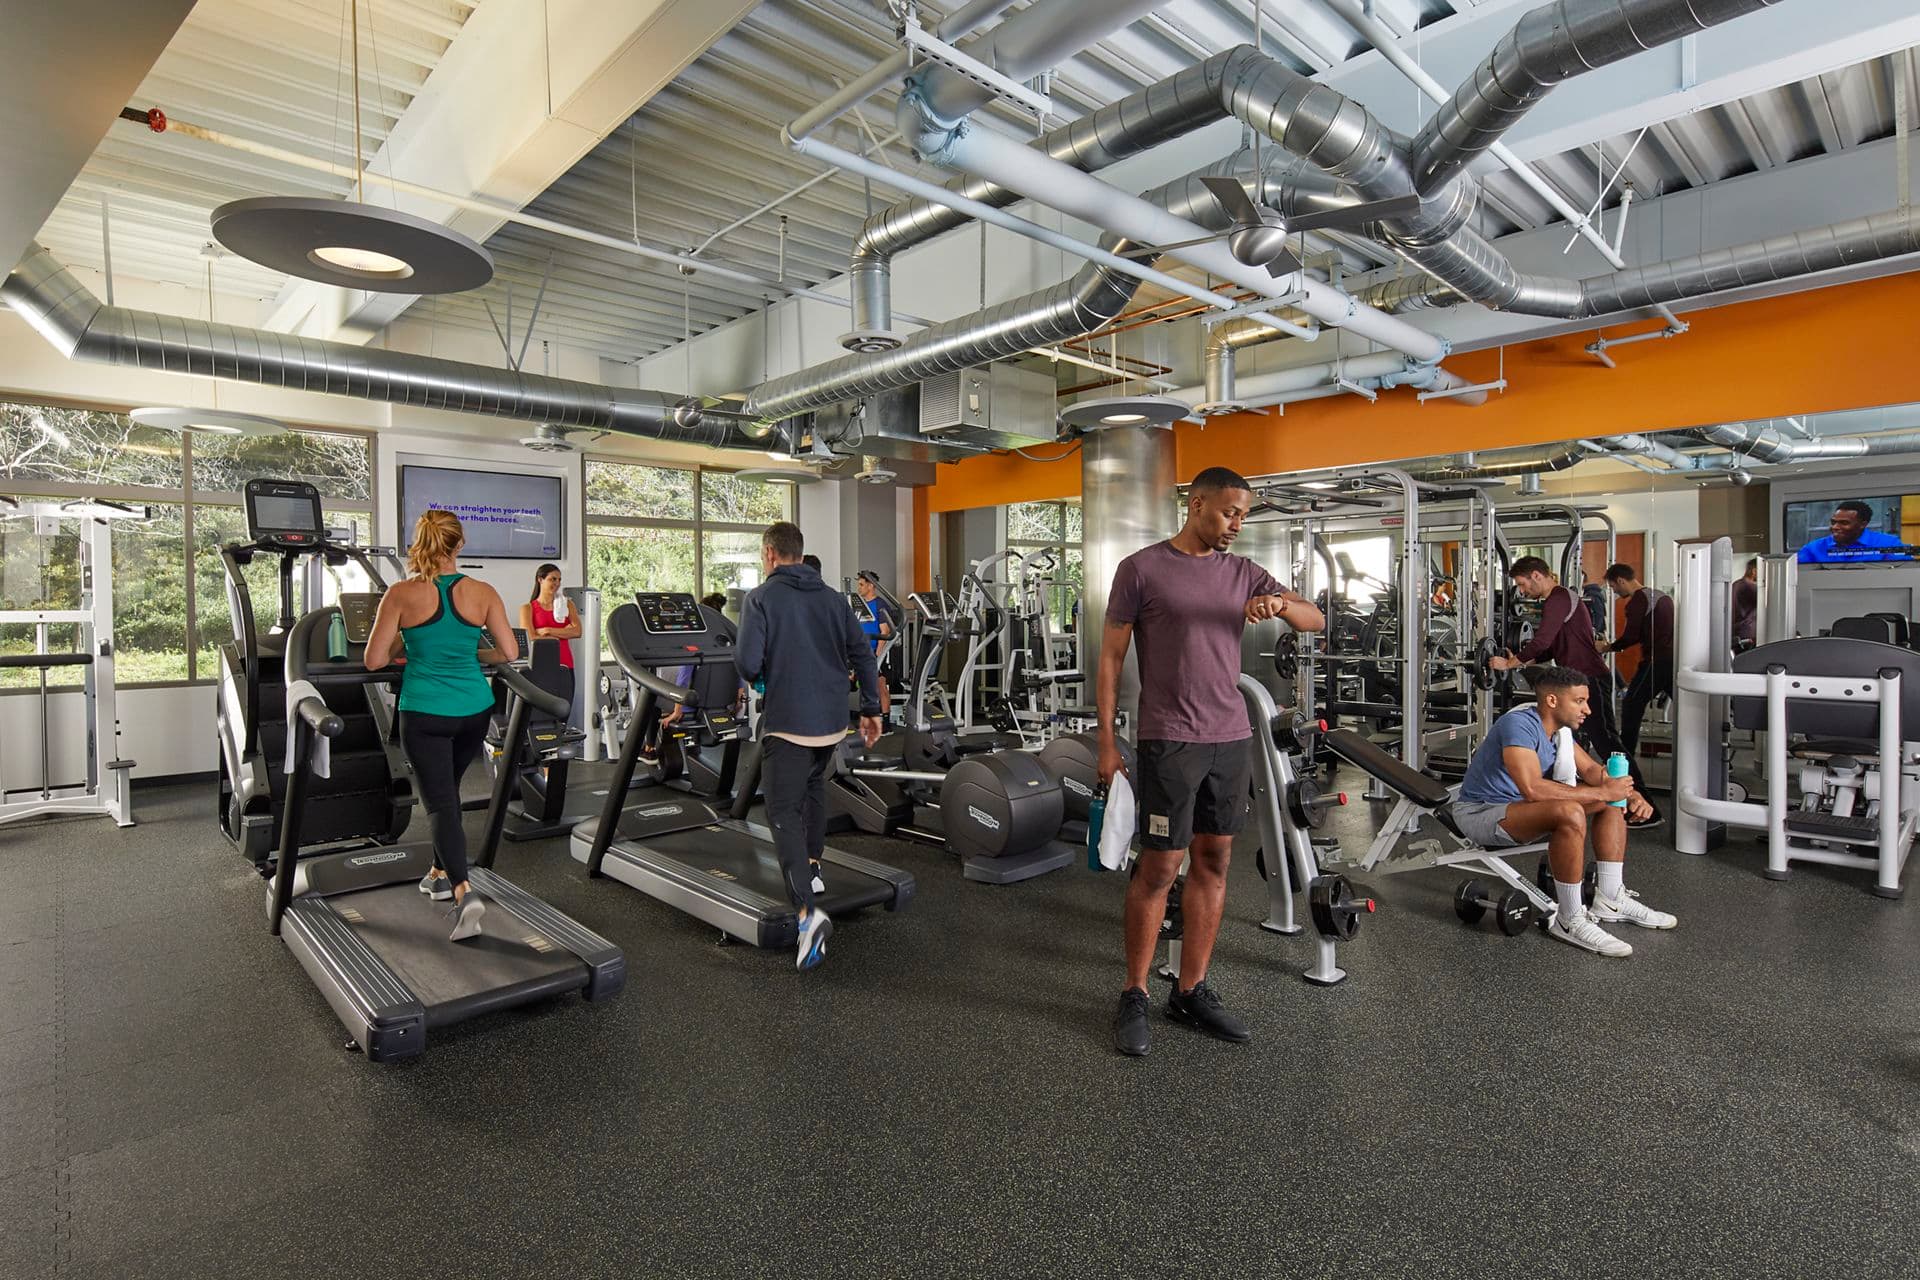 Interior view of fitness center at Paseo Del Mar in San Diego, CA.